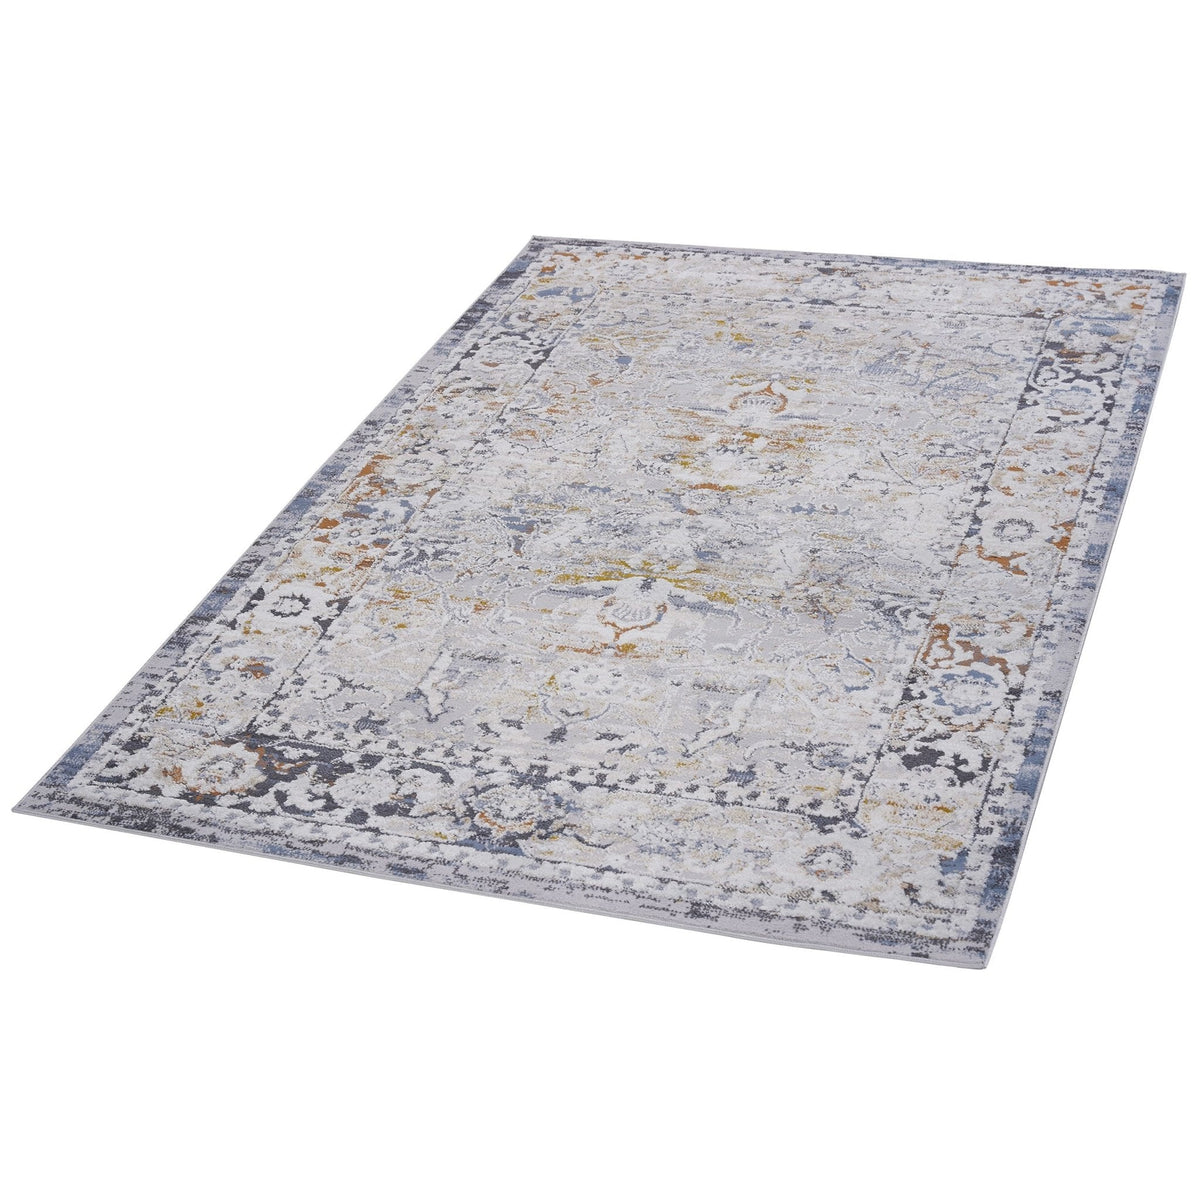 Payas Ivory - Grey Rug Size 6'7'' x 9' | Mid in Mod | Houston TX | Best Furniture stores in Houston